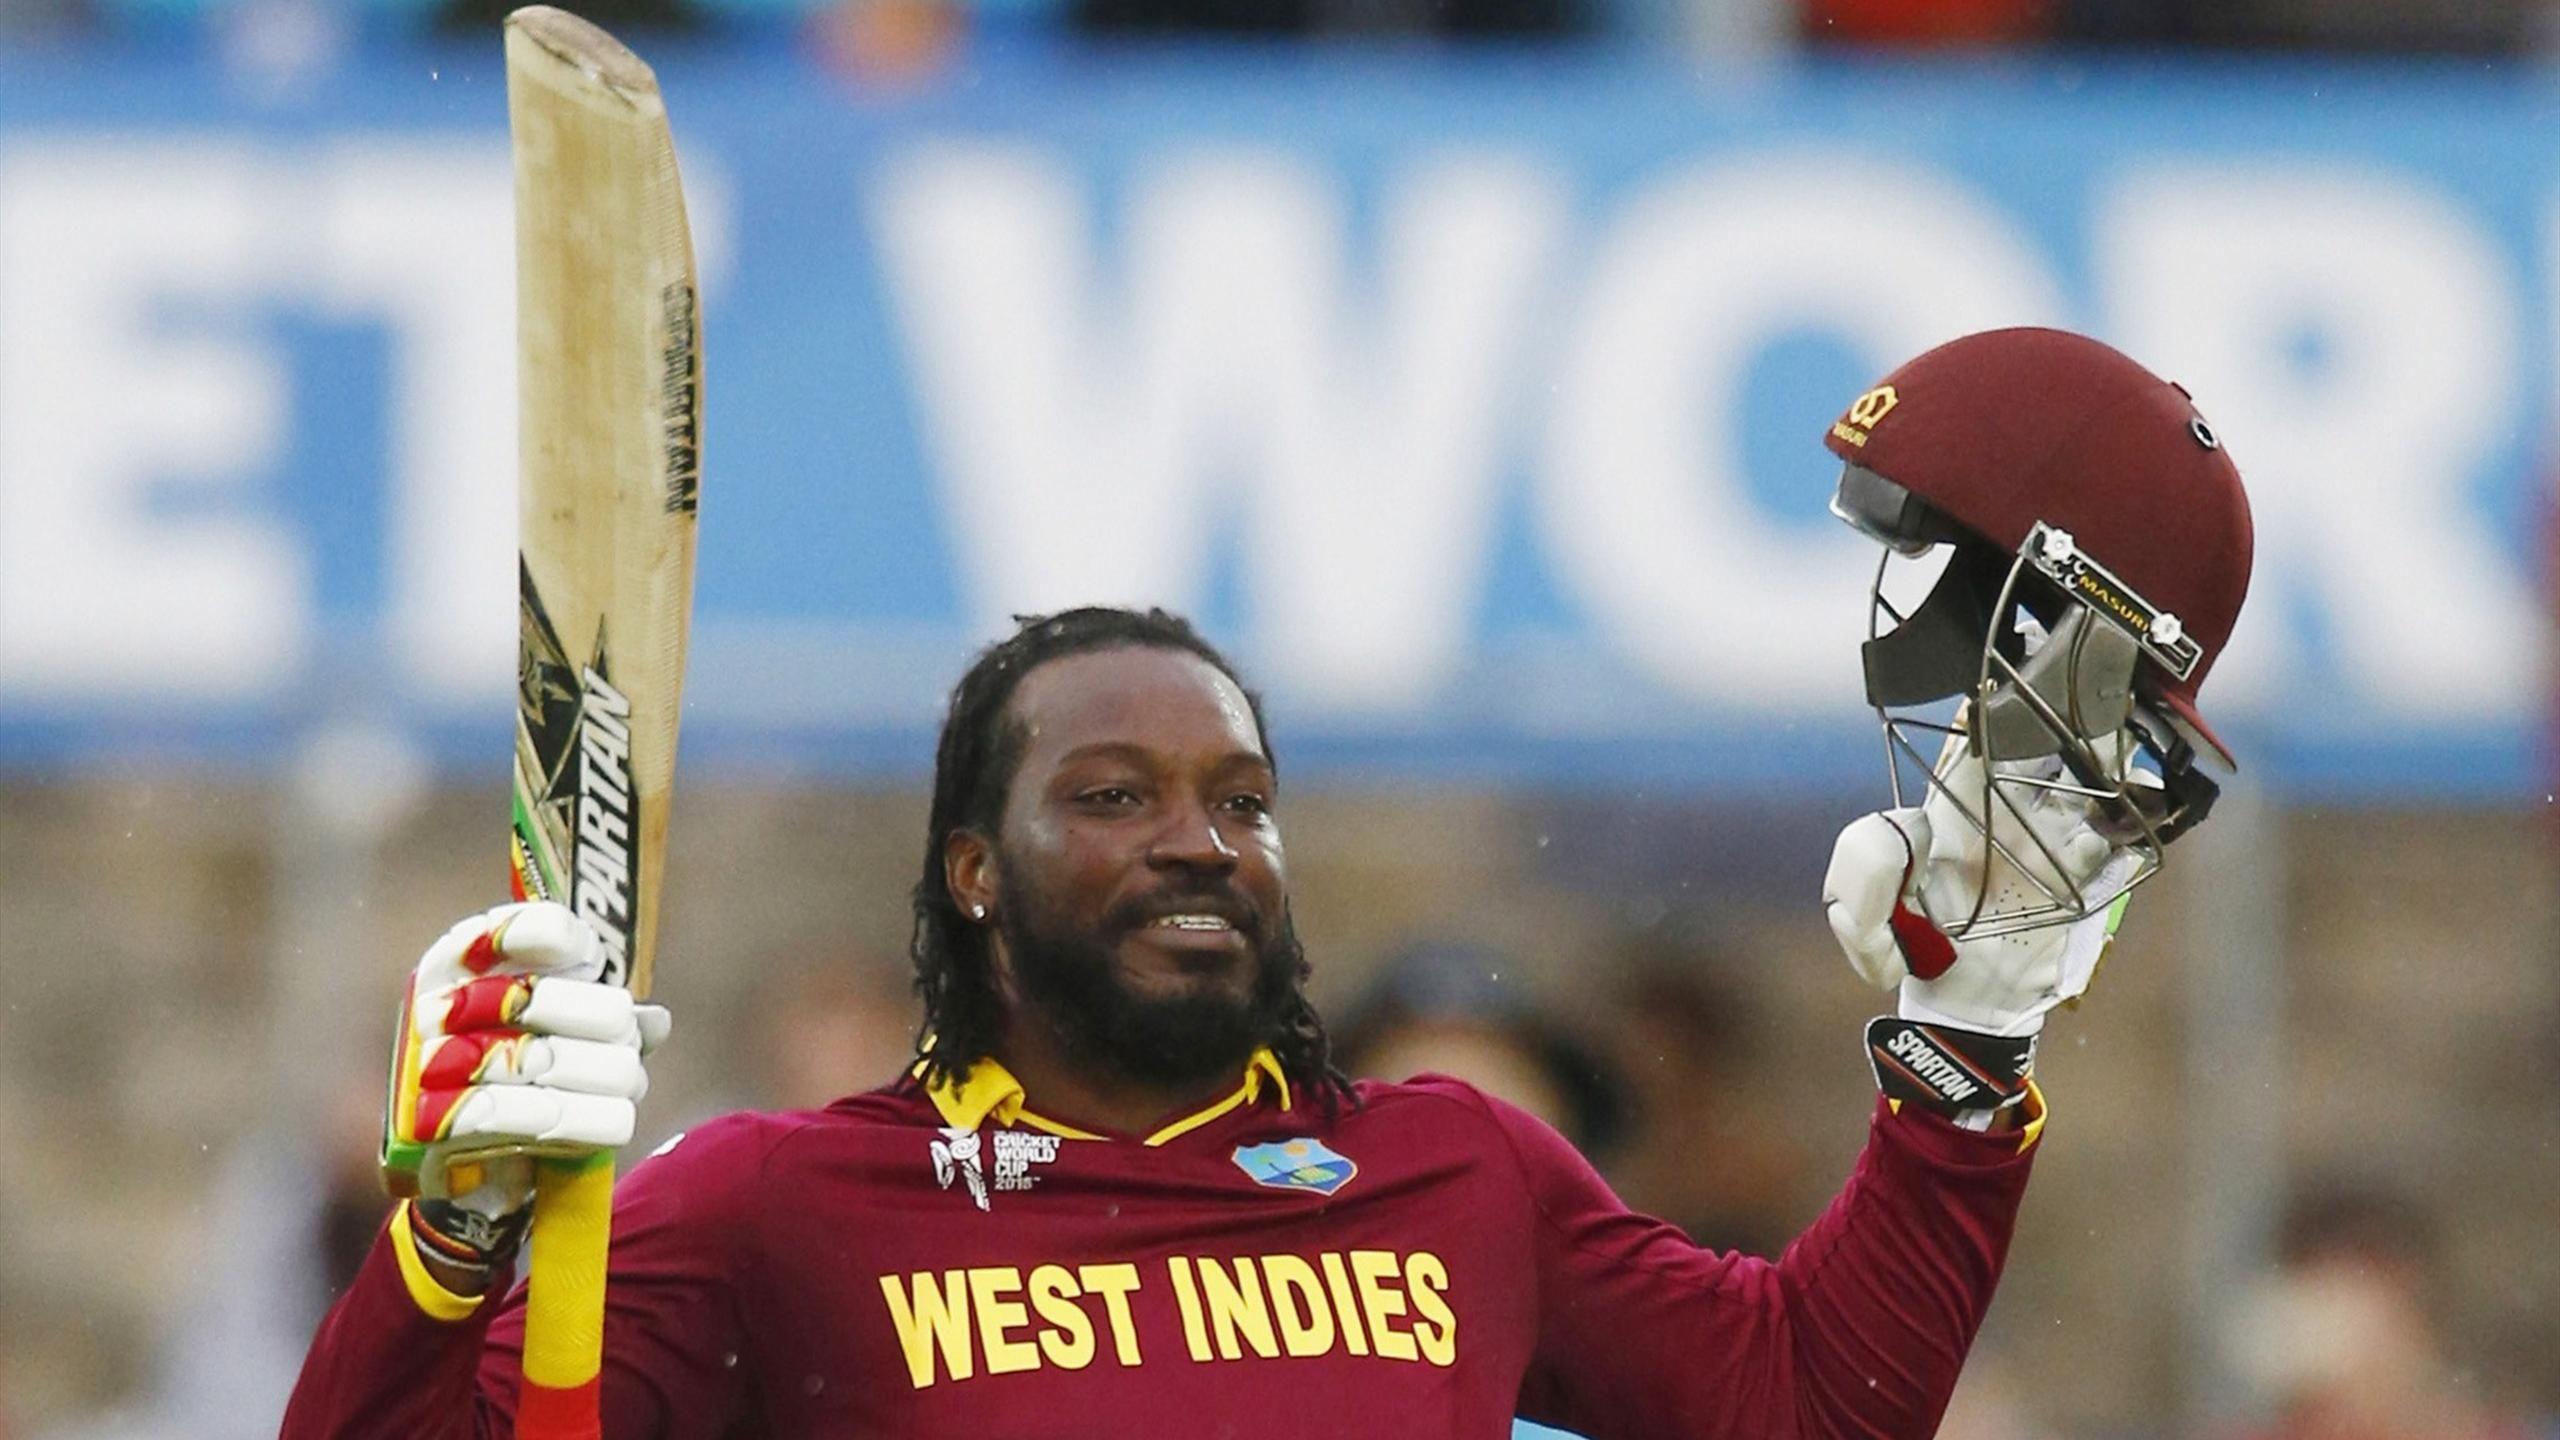 Chris Gayle photo dupes fans hours after he scored World Cup's first